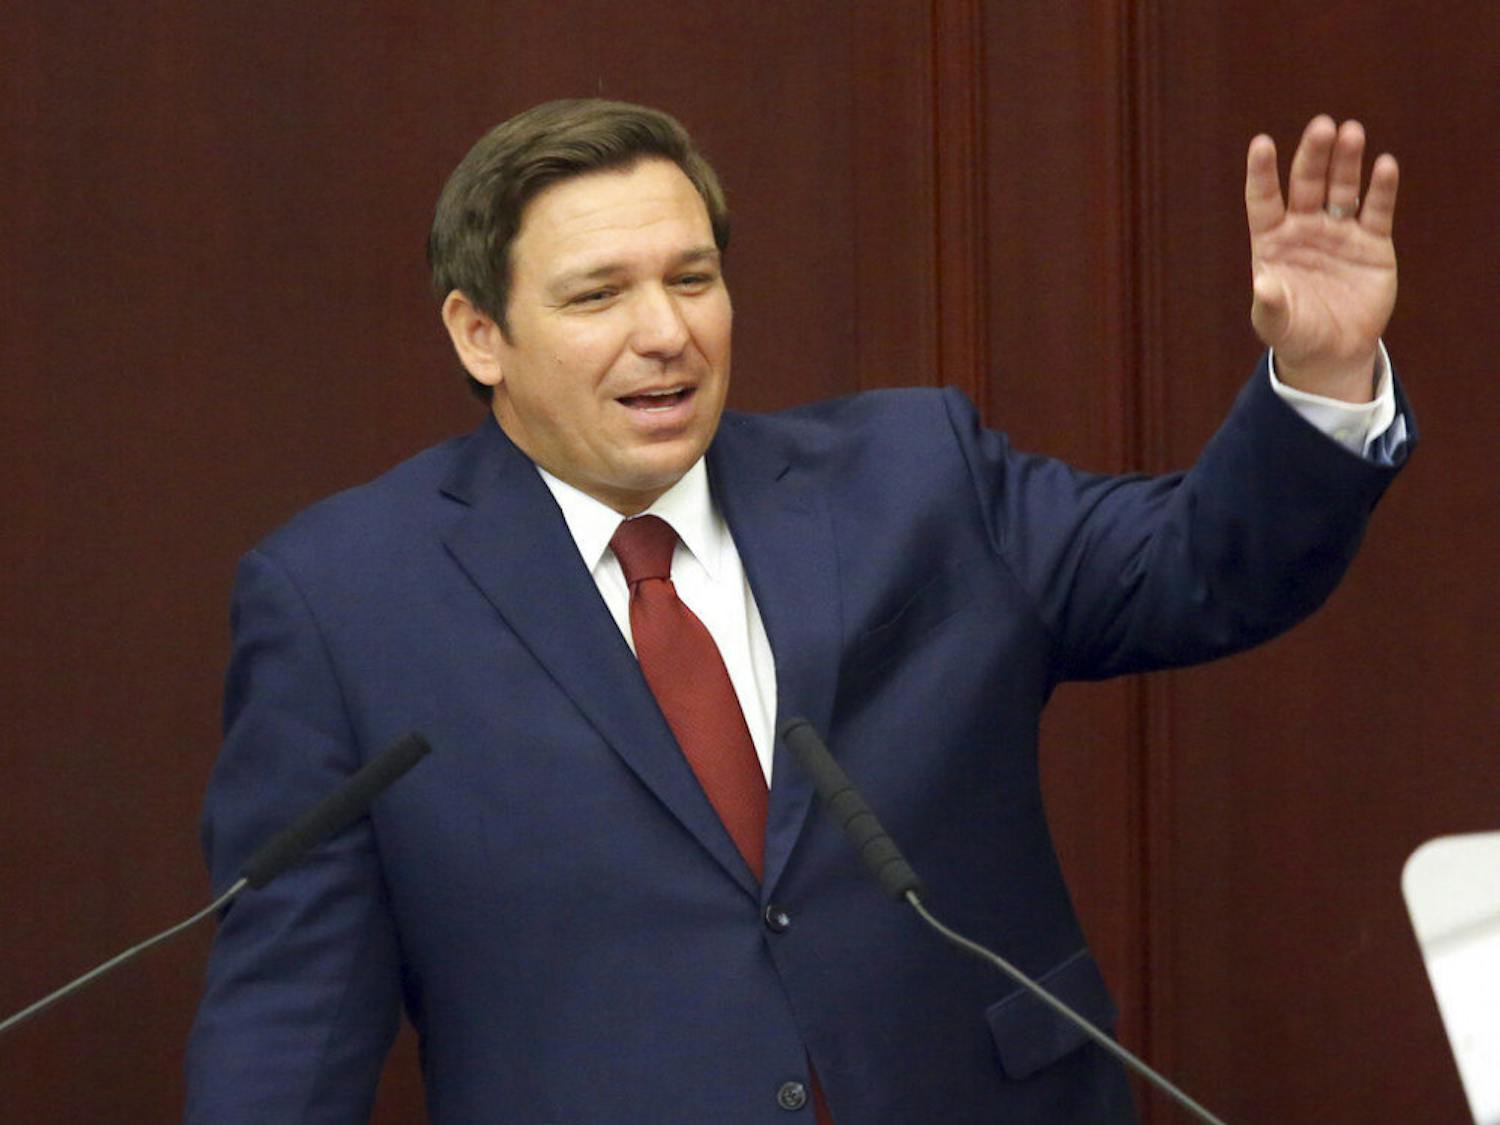 FILE- In this March 5, 2019 file photo, Florida Gov. Ron Desantis gives his state of the state address on the first day of the legislative session in Tallahassee, Fla. De Santis has pushed for a repeal to Florida's ban on smokable medical marijuana. The Senate passed a bill Thursday, March 7, 2019, that repeals the ban, and now the House takes up that legislation Wednesday. It's the first major action by lawmakers this year, largely because DeSantis gave them a mid-March deadline to get it done. (AP Photo/Steve Cannon, File)